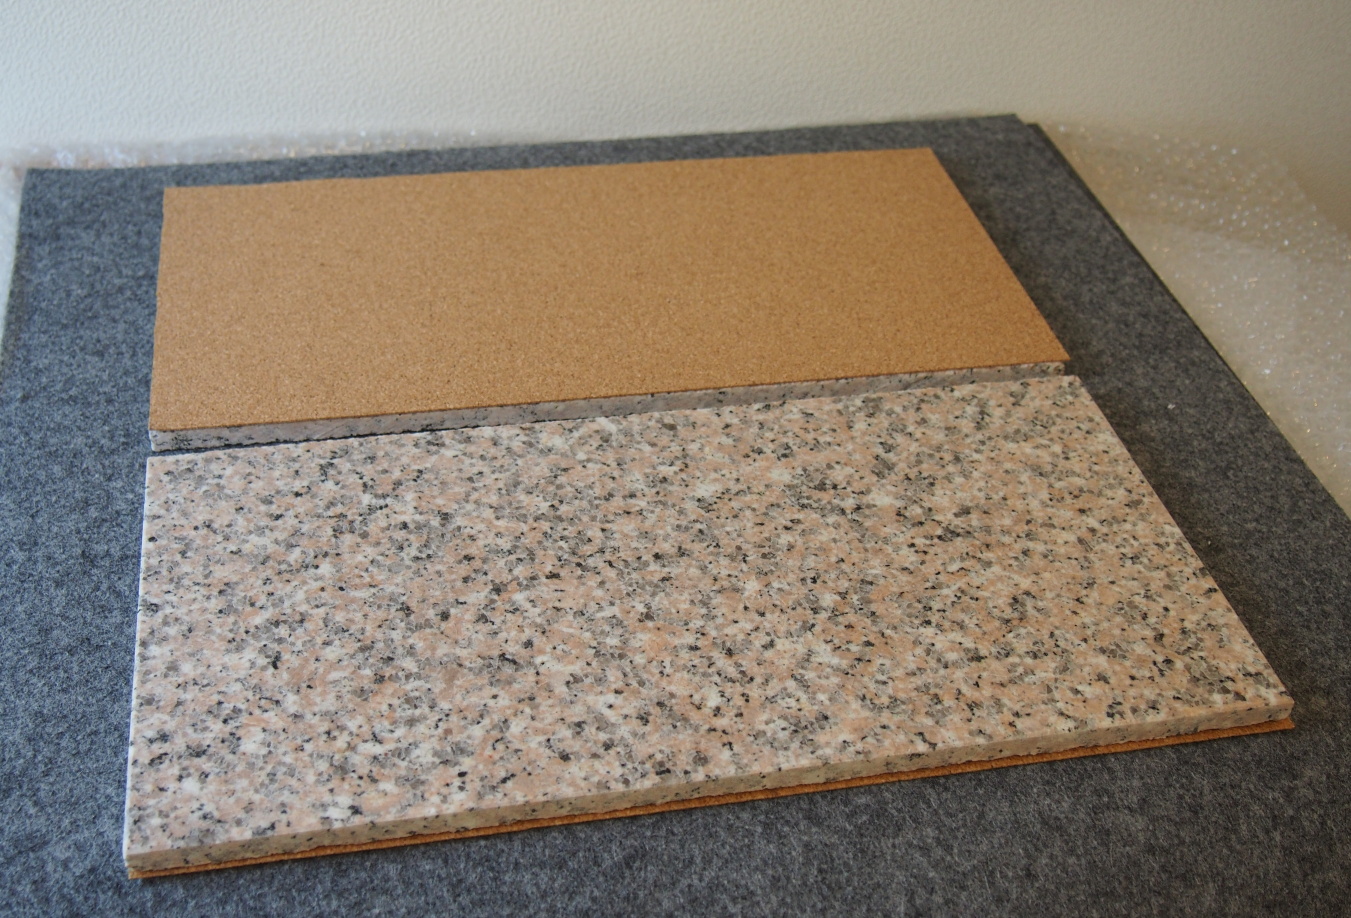 14. Granite board with cork sheet attached on it (BD11)